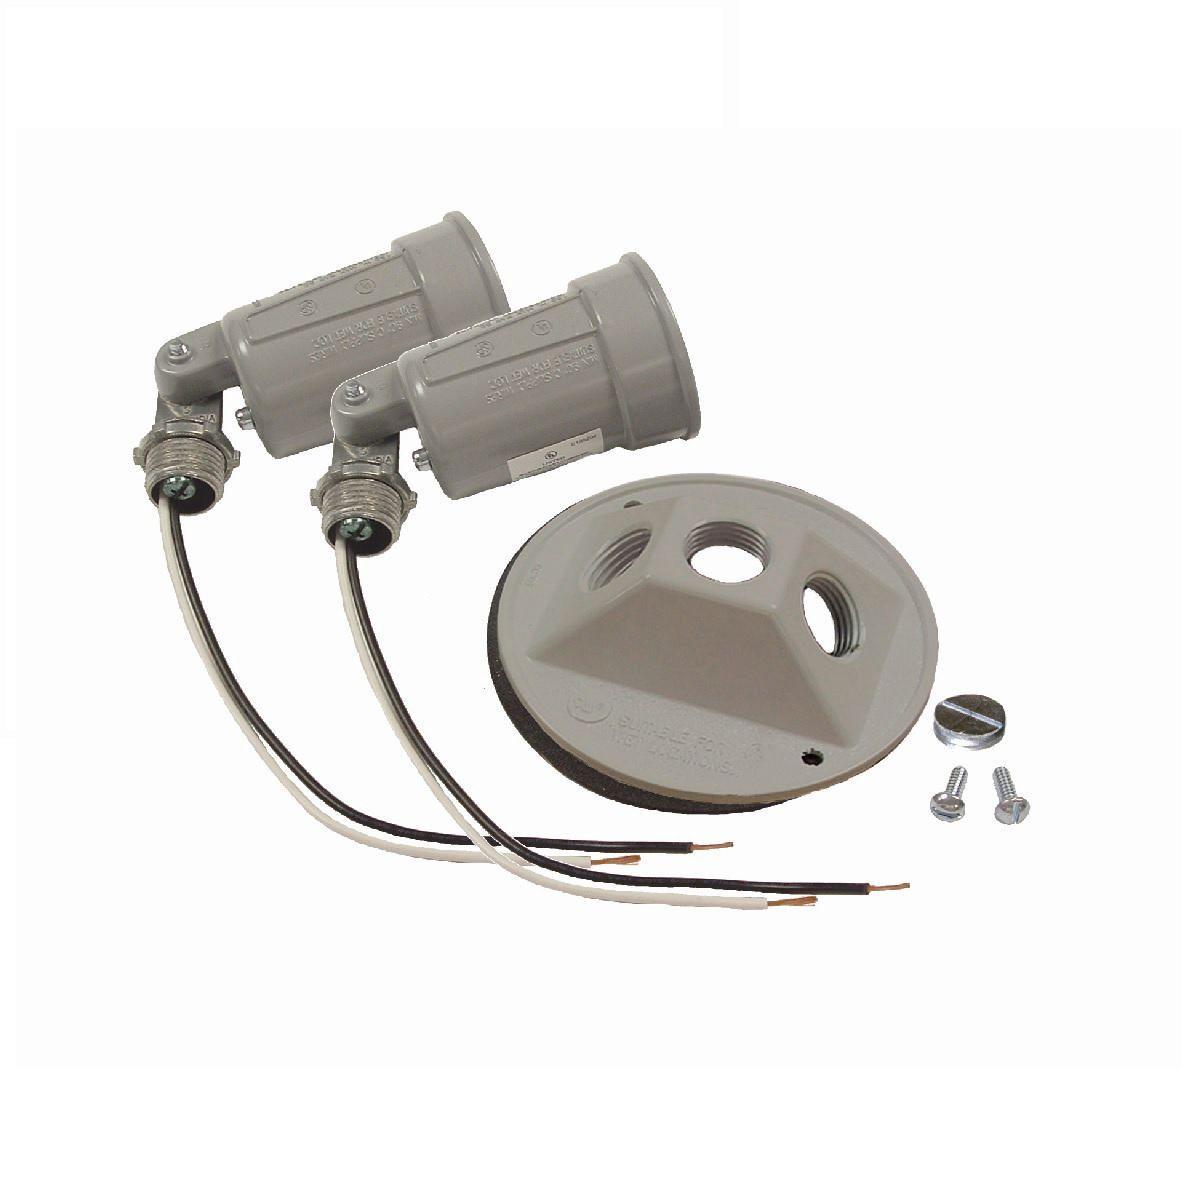 Hubbell 5625-5 4 in. Round Weatherproof Combination Cover for 75-150W Par 38 Lamps, Includes 2 Lampholders, Gasket, and Hardware, Gray, Carded  ; Rugged die cast constructions. ; State-of-the-art powder coat finish provides maximum weatherability and scratch resistance.